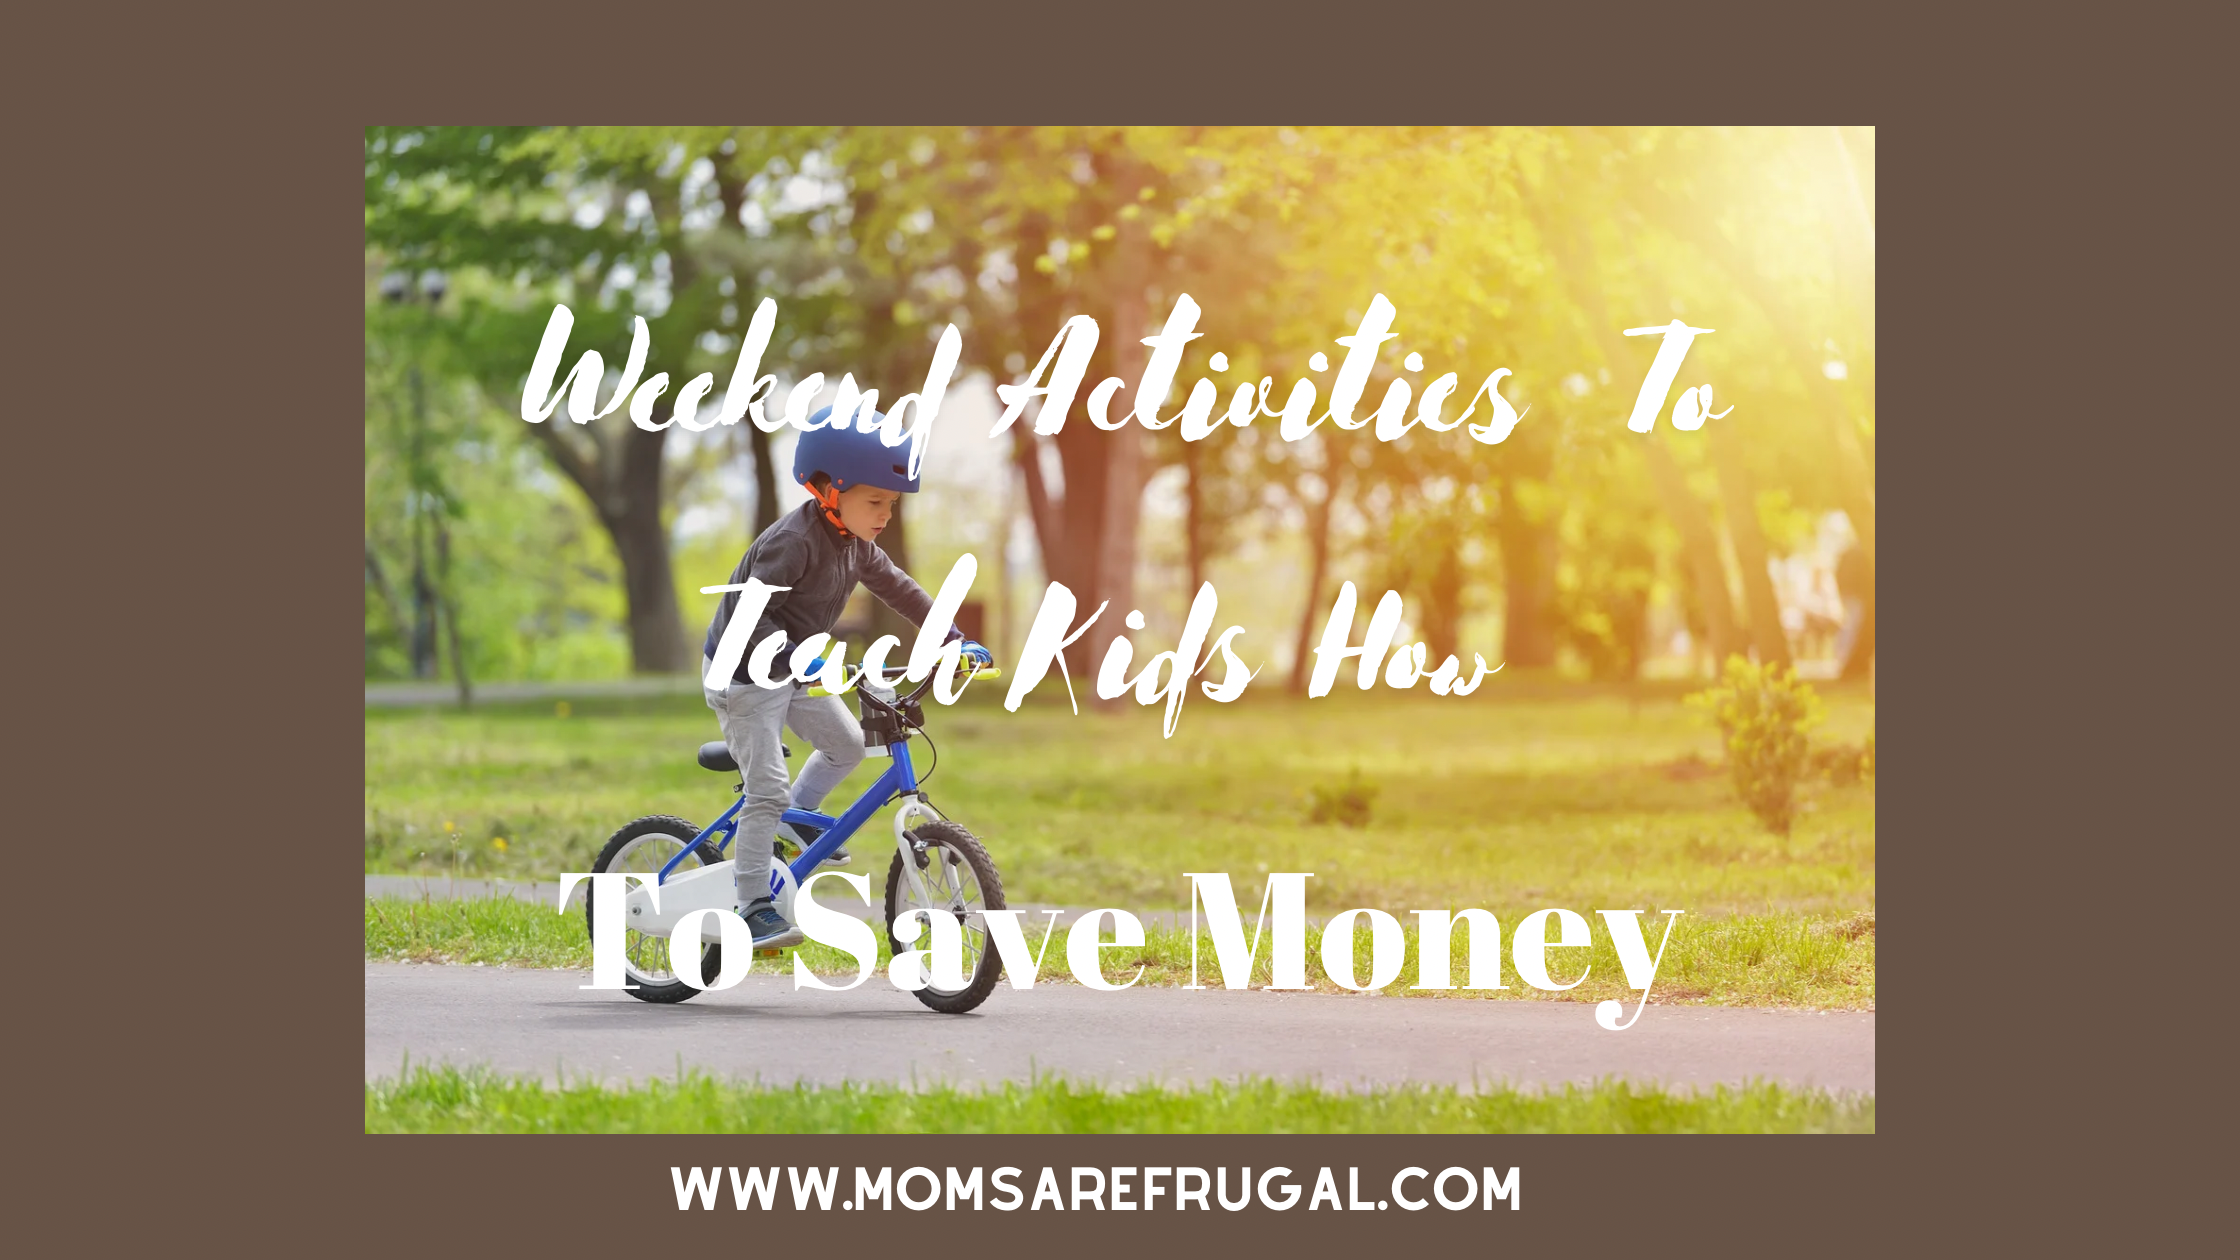 Weekend Activities to Teach Kids To Save Money